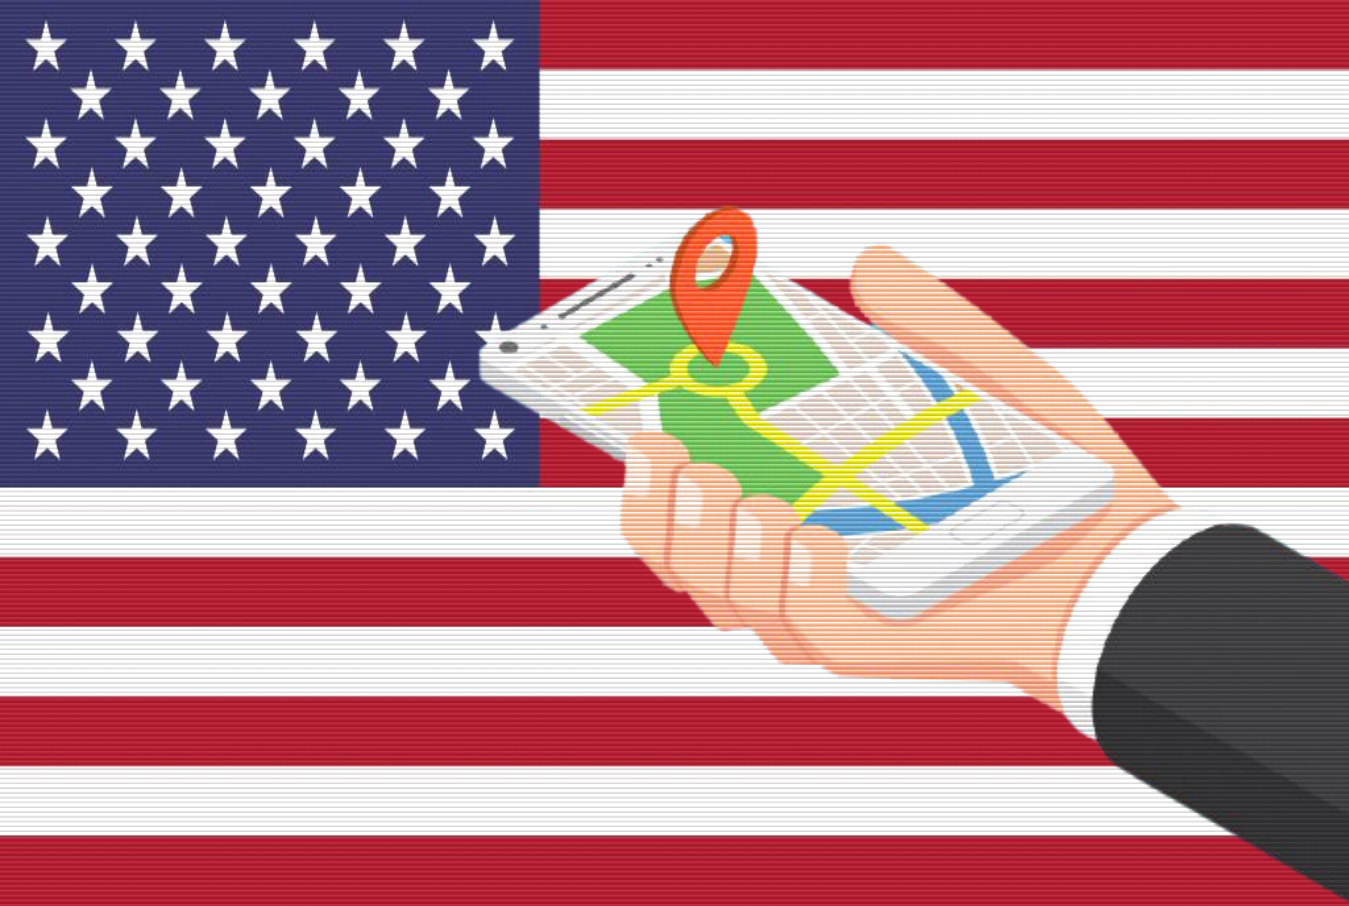 Generation likely share their location data with government